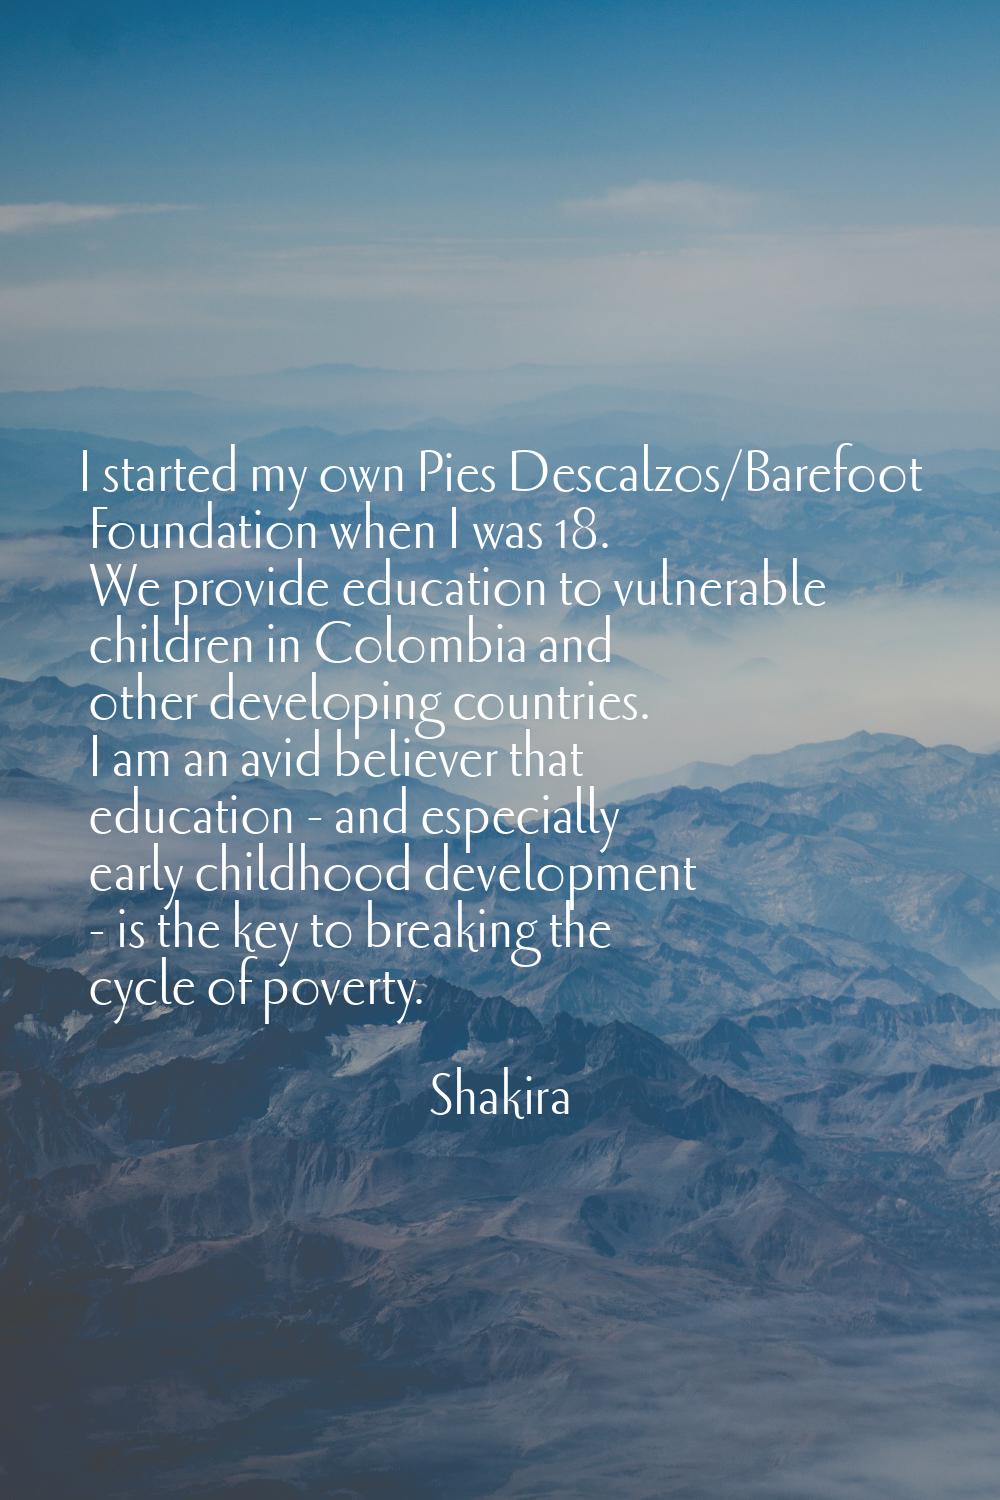 I started my own Pies Descalzos/Barefoot Foundation when I was 18. We provide education to vulnerab